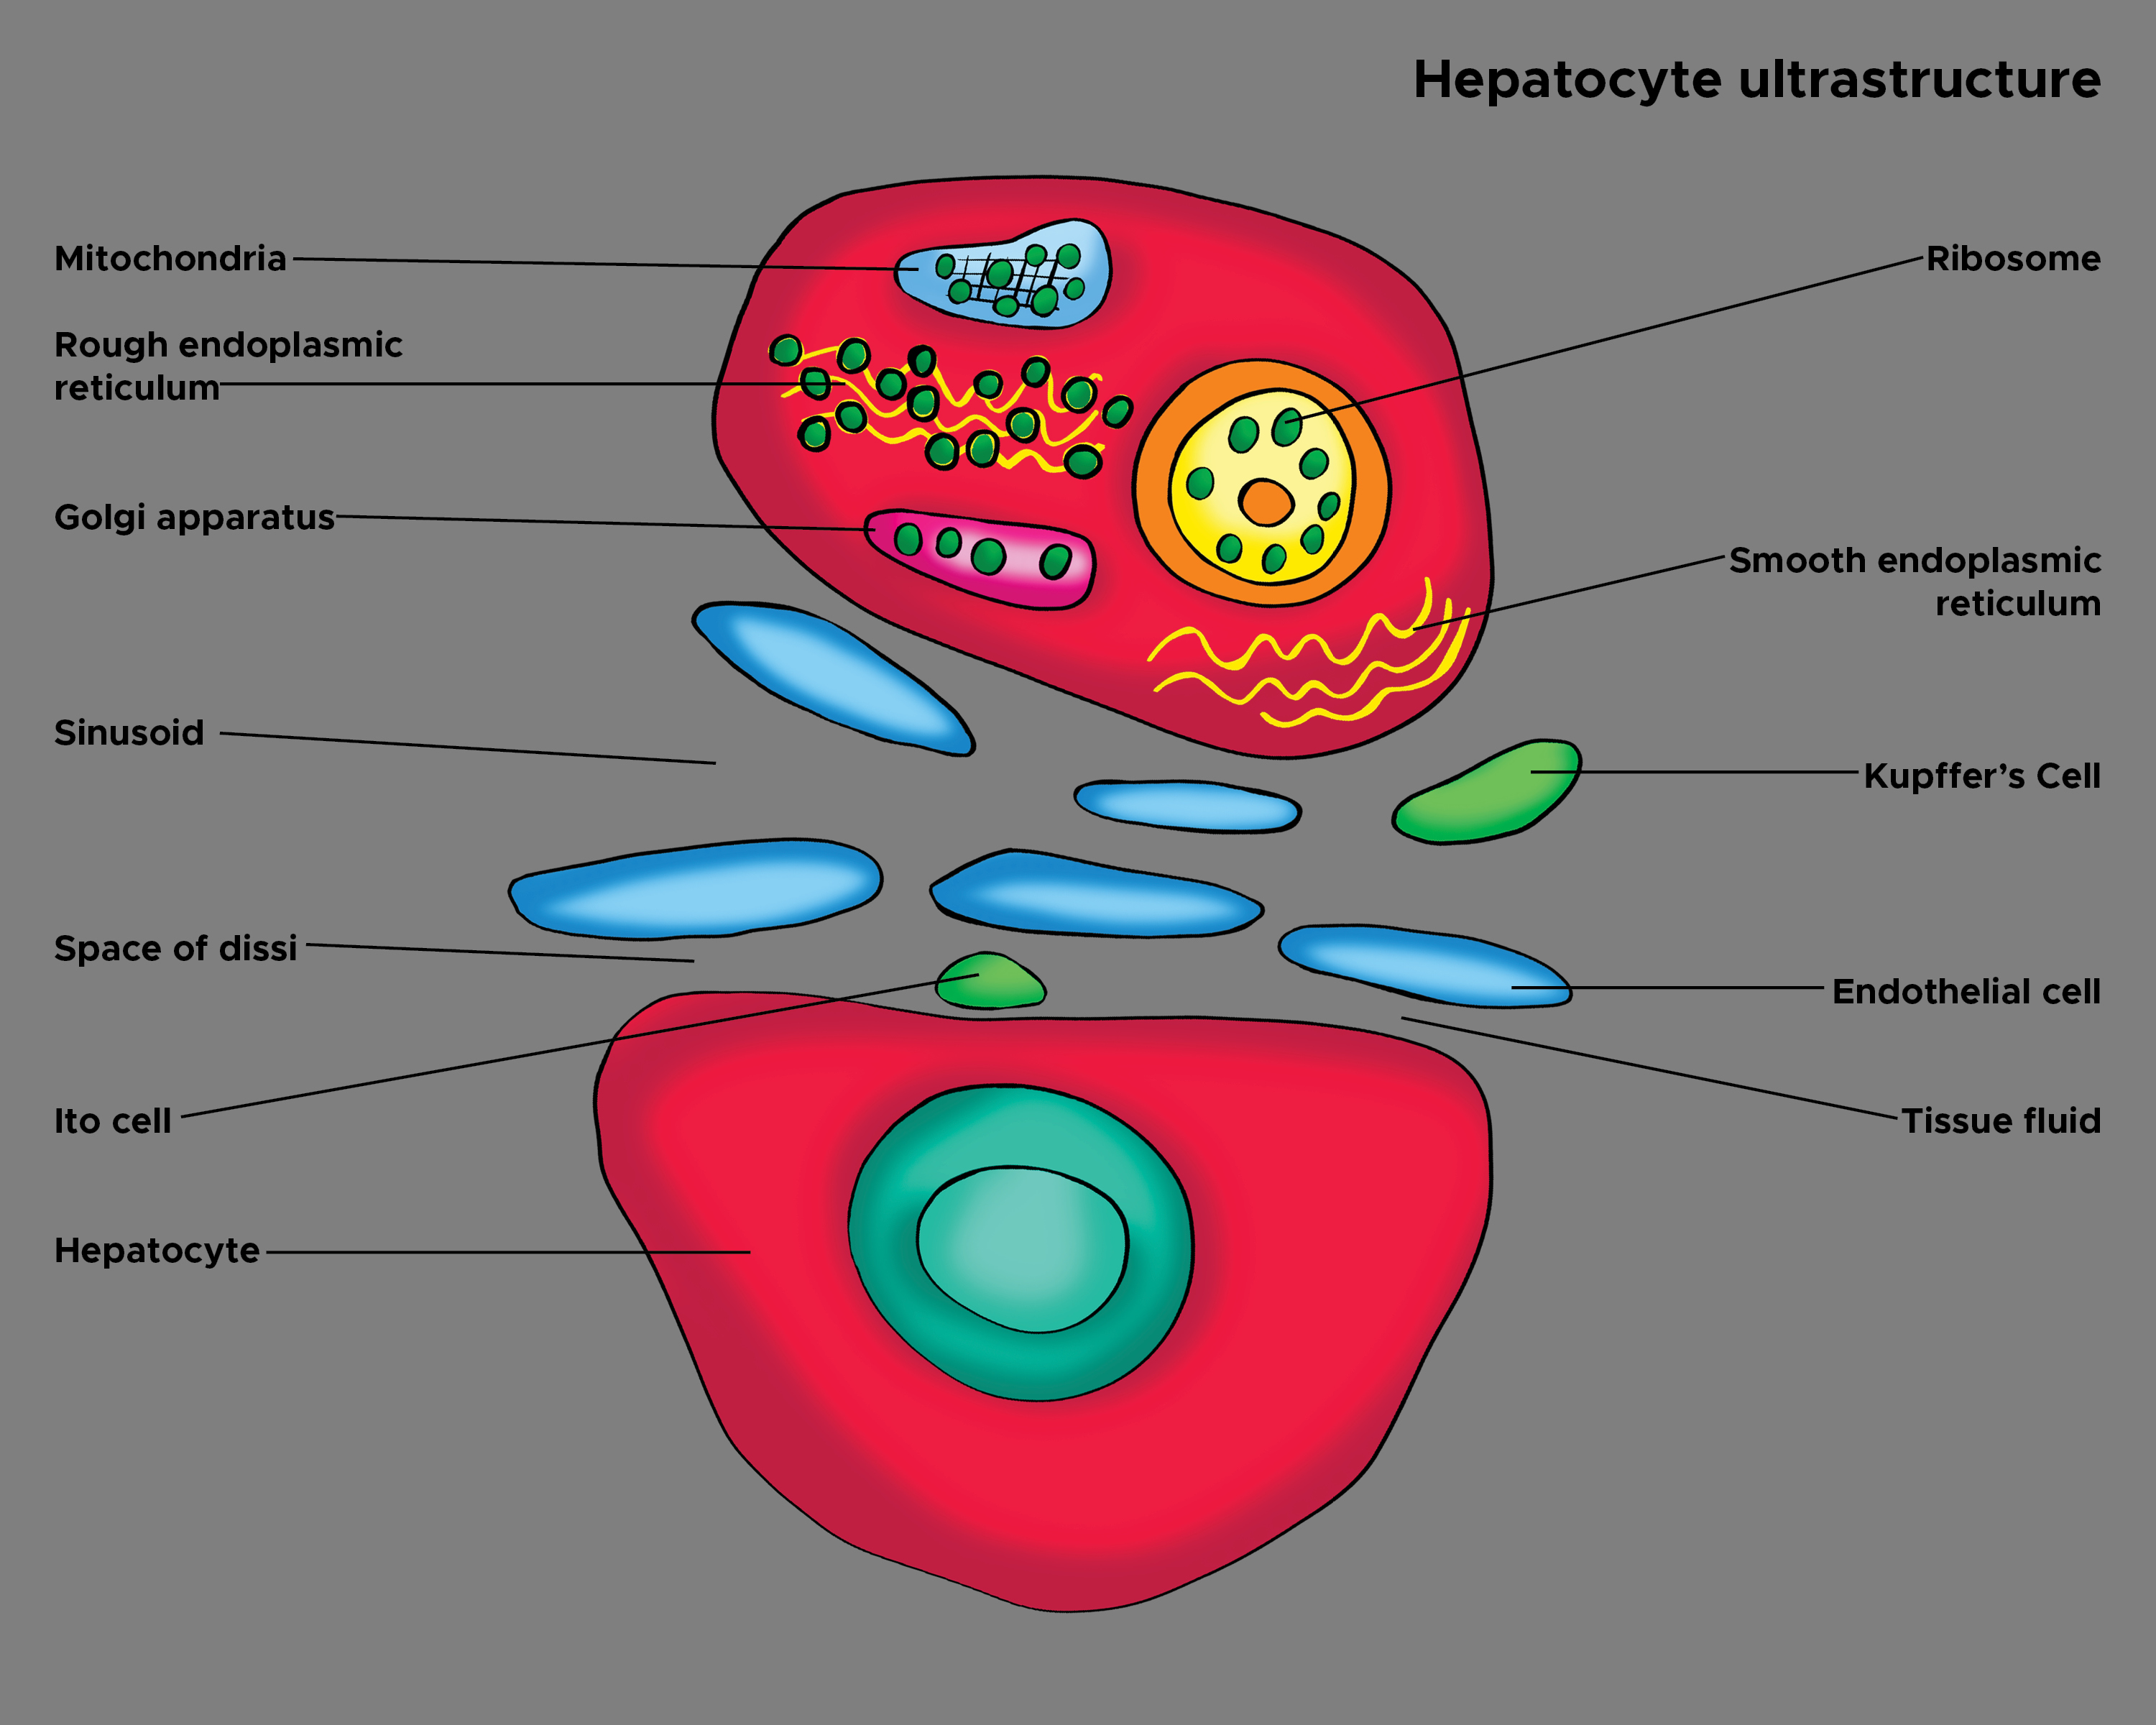 Illustration of Hepatocyte Ultrastructure. Sinusoid of liver, Kupffer's Cell